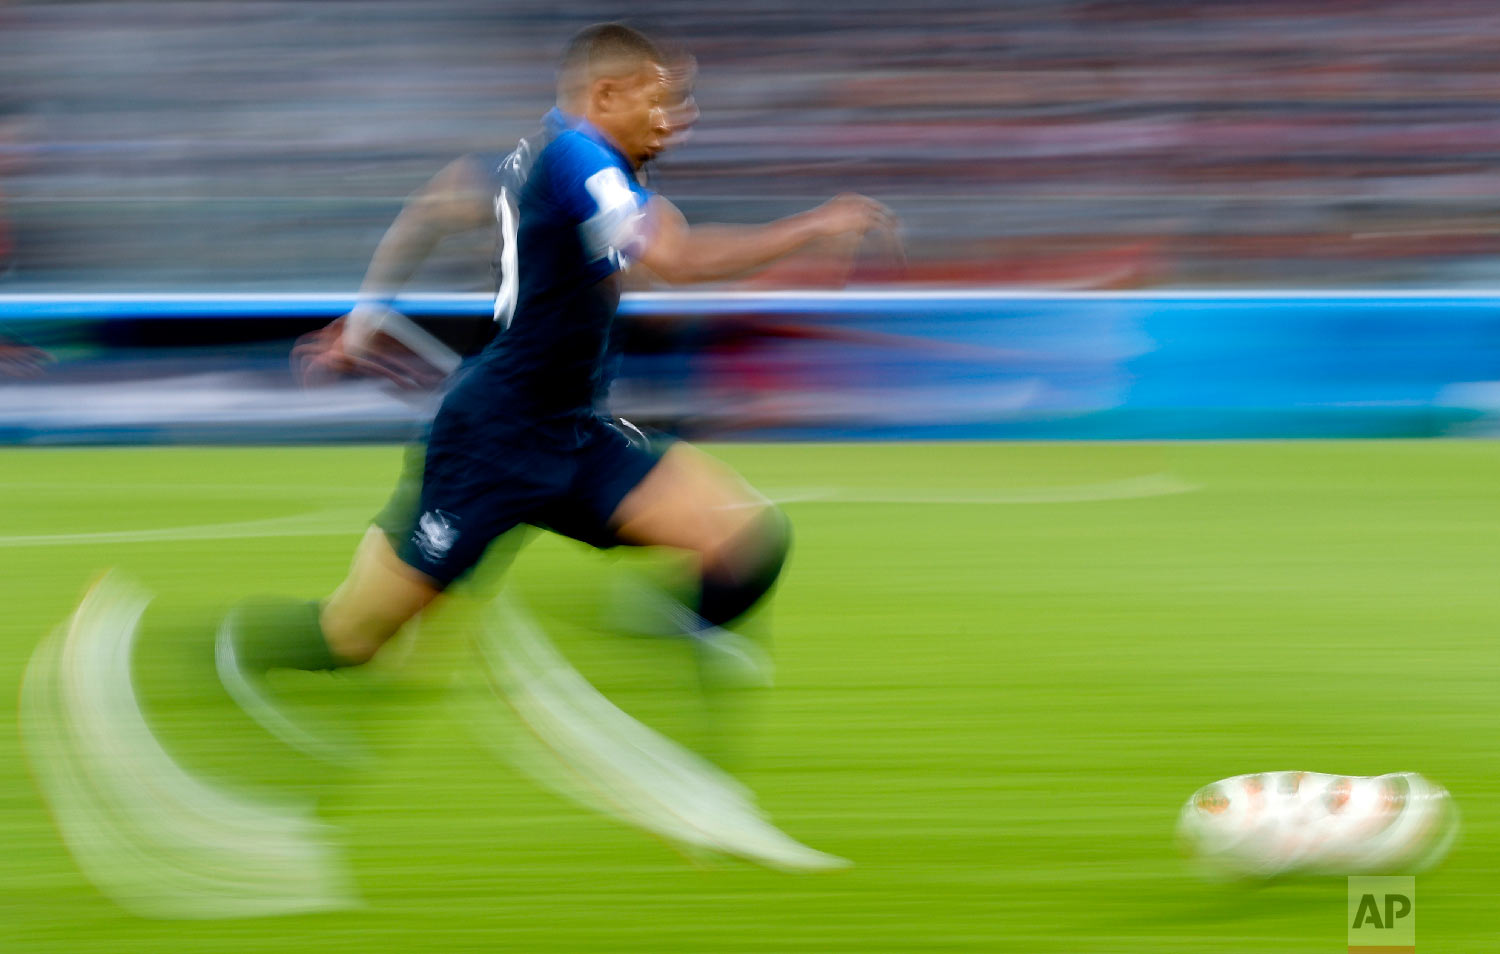  France's Kylian Mbappe runs with the ball during the semifinal match between France and Belgium at the 2018 soccer World Cup in the St. Petersburg Stadium, in St. Petersburg, Russia on July 10, 2018. (AP Photo/Petr David Josek) 